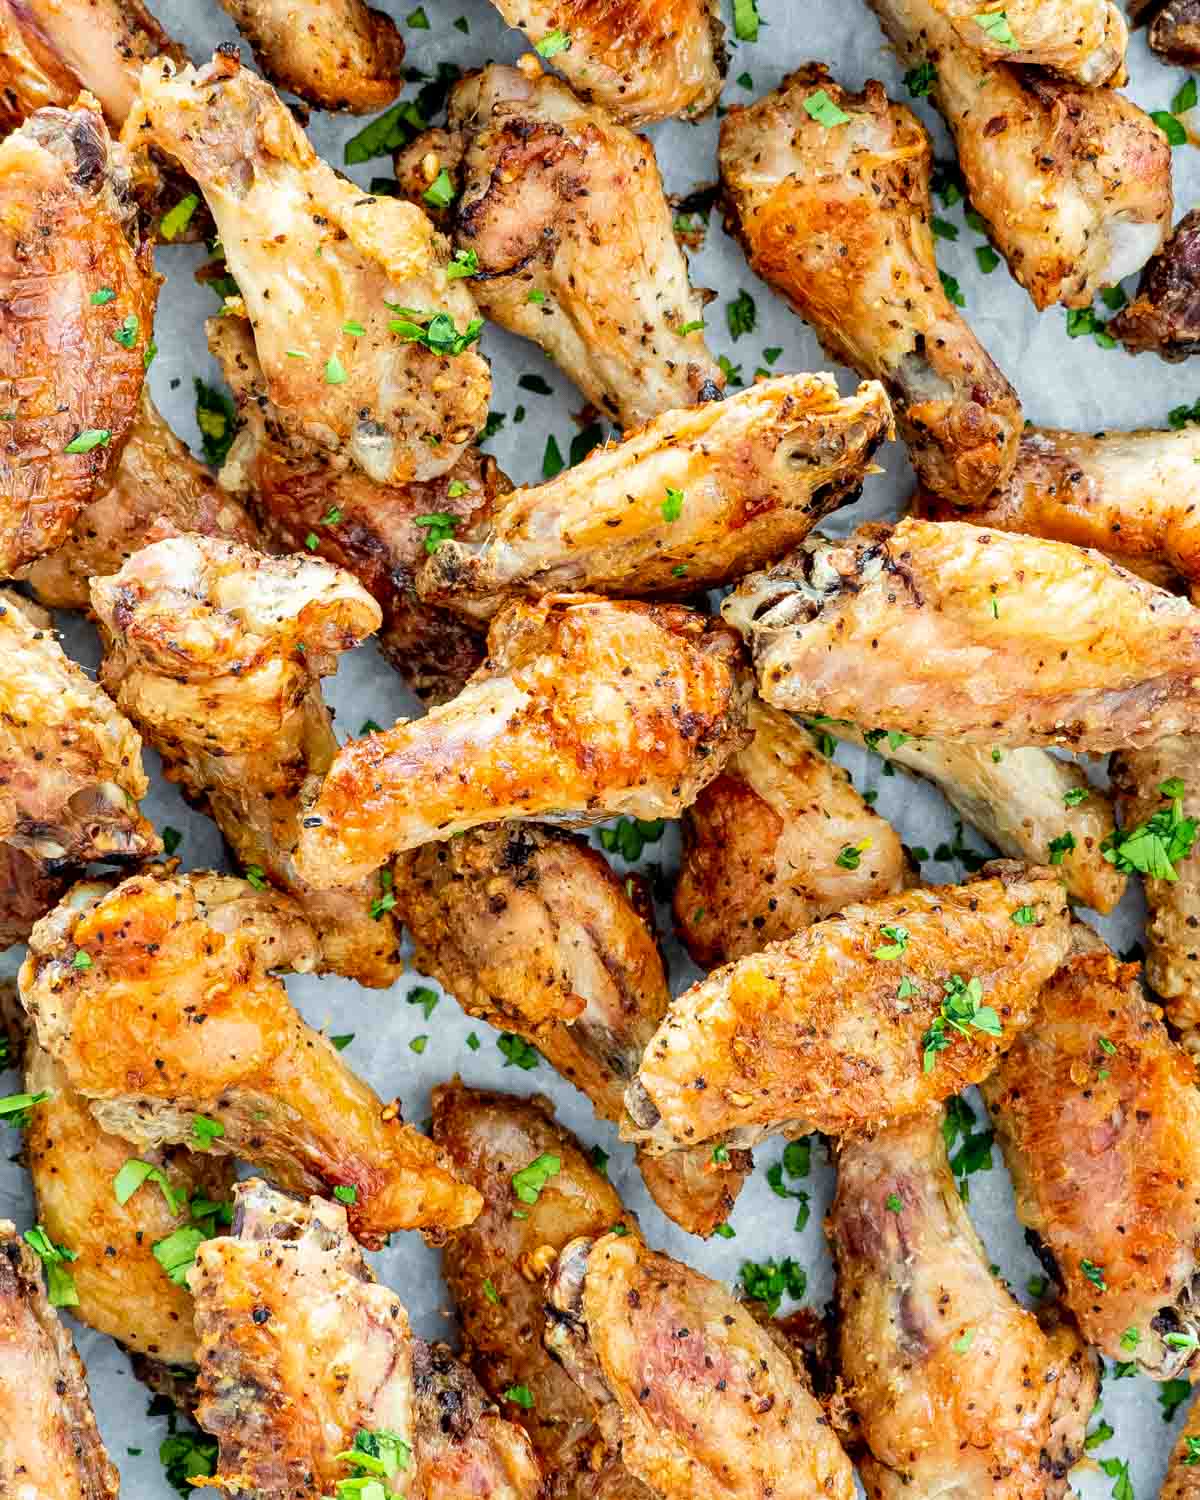 crispy baked salt and pepper wings garnished with parsley.